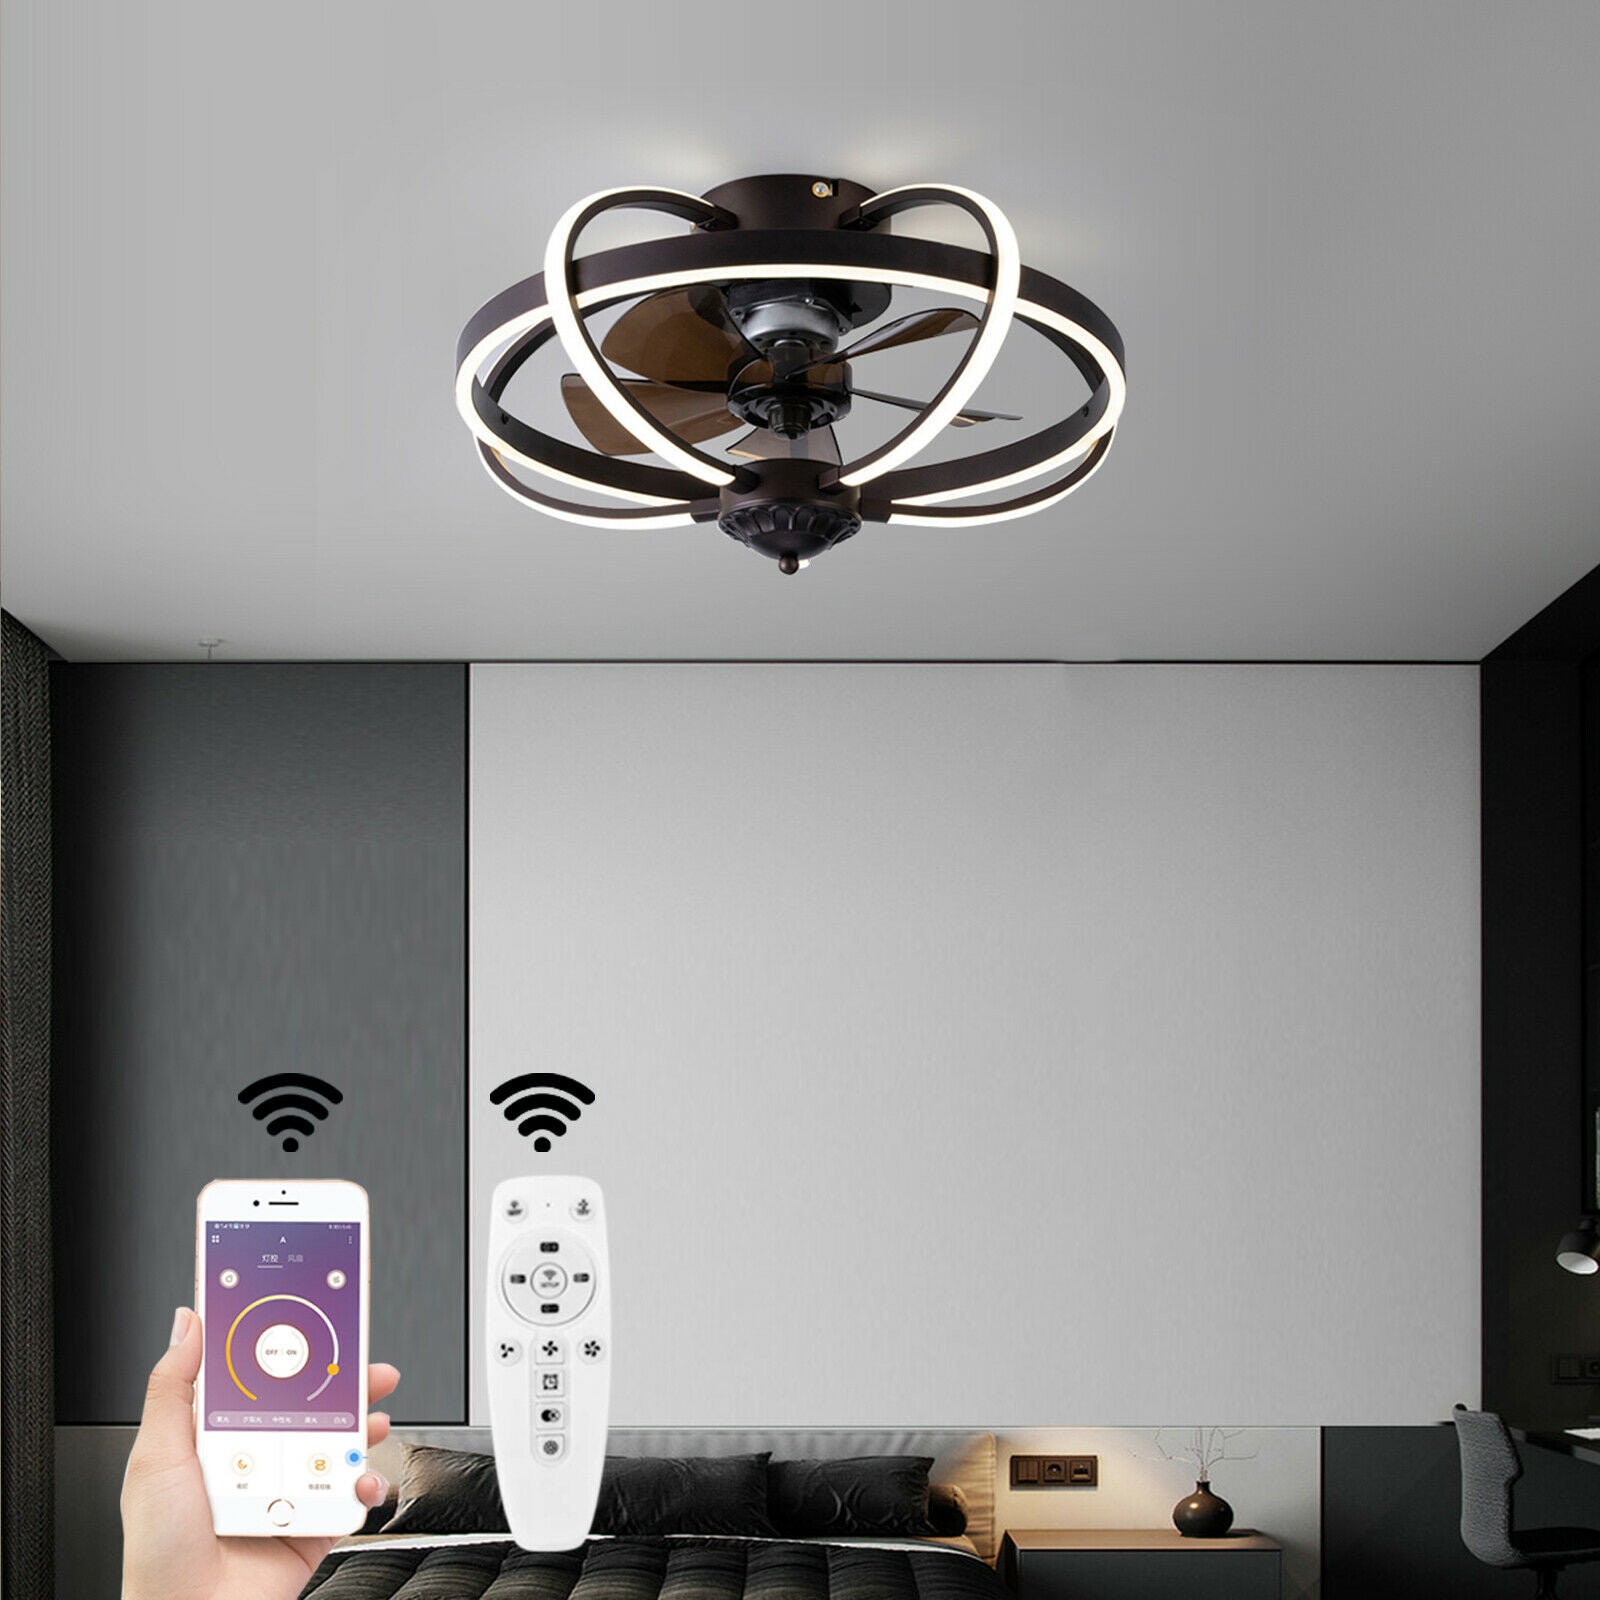 20 Inch LED Ceiling Fan Light Modern Cage Chandelier 3 Speed Setting with Remote and APP Control Function for Bedroom